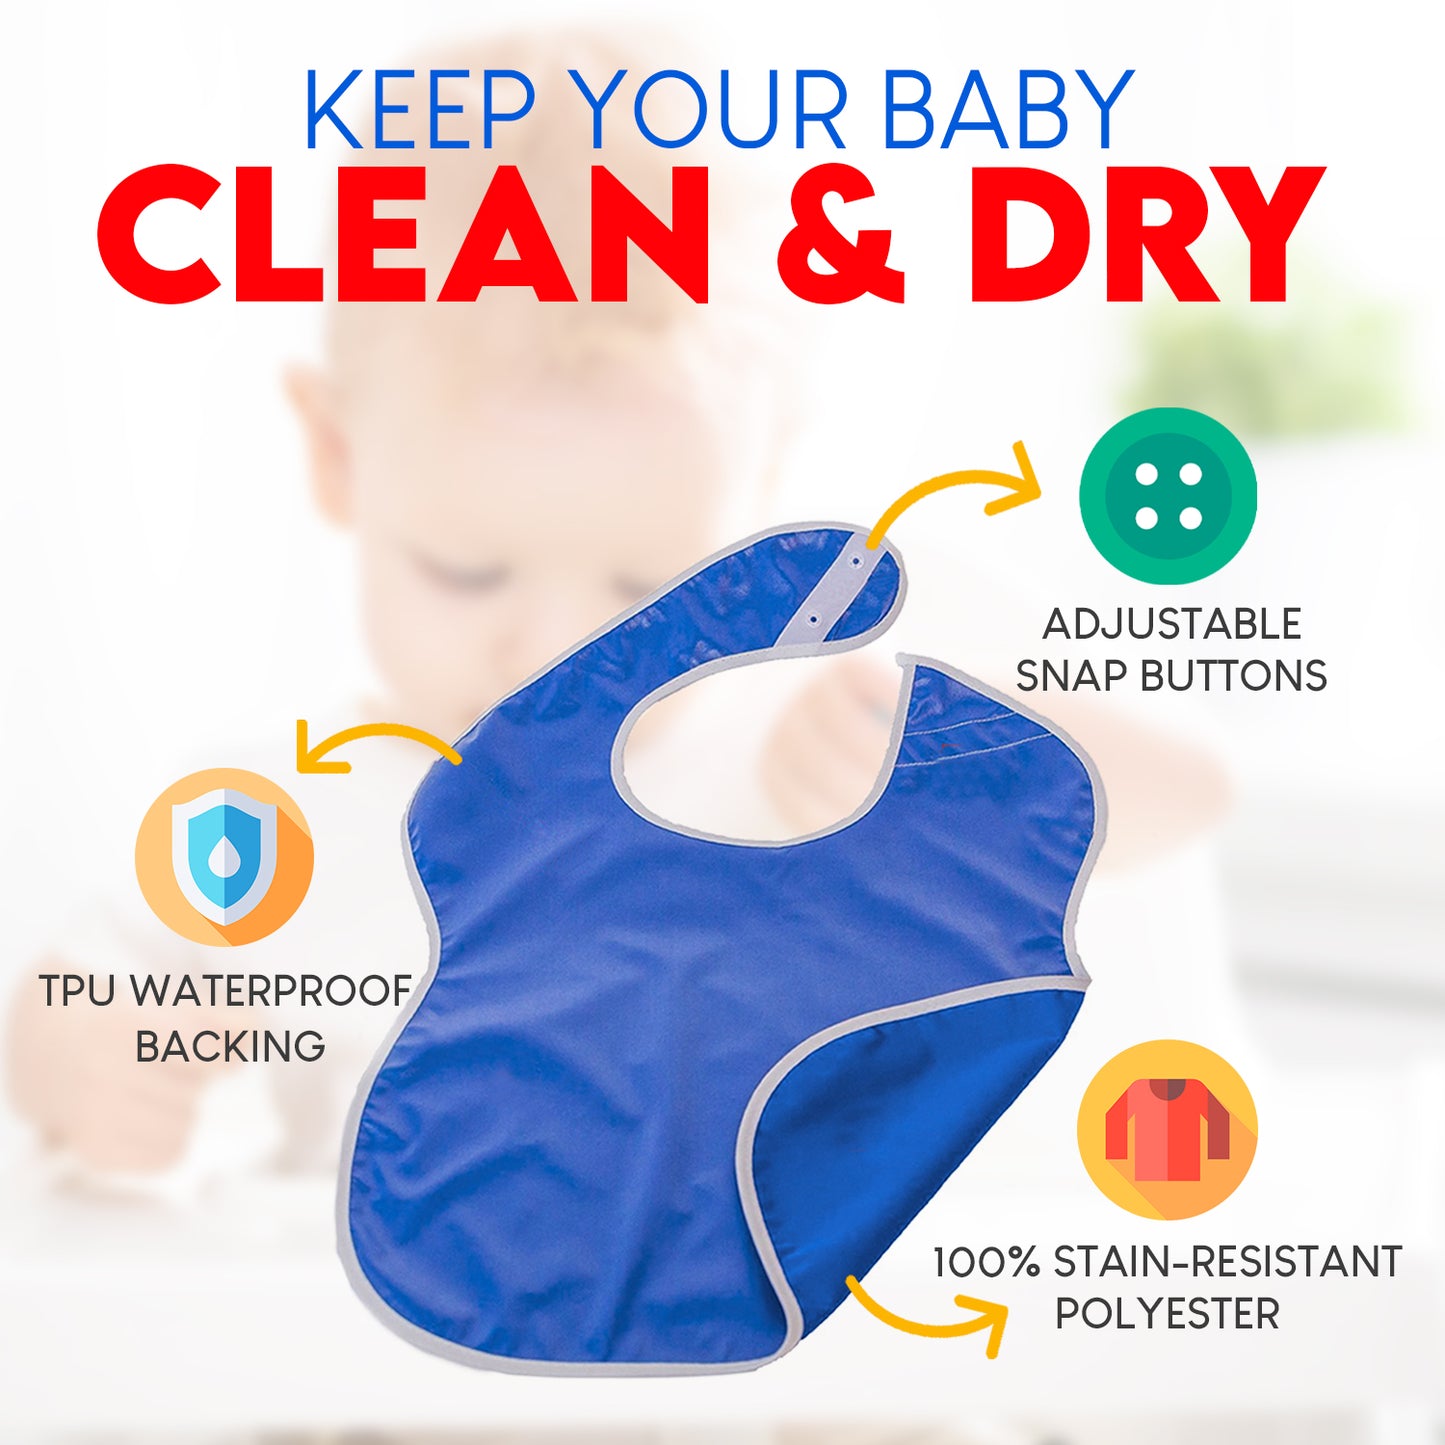 Large Waterproof Toddler Bibs with Snap Buttons - Outdoor Colors